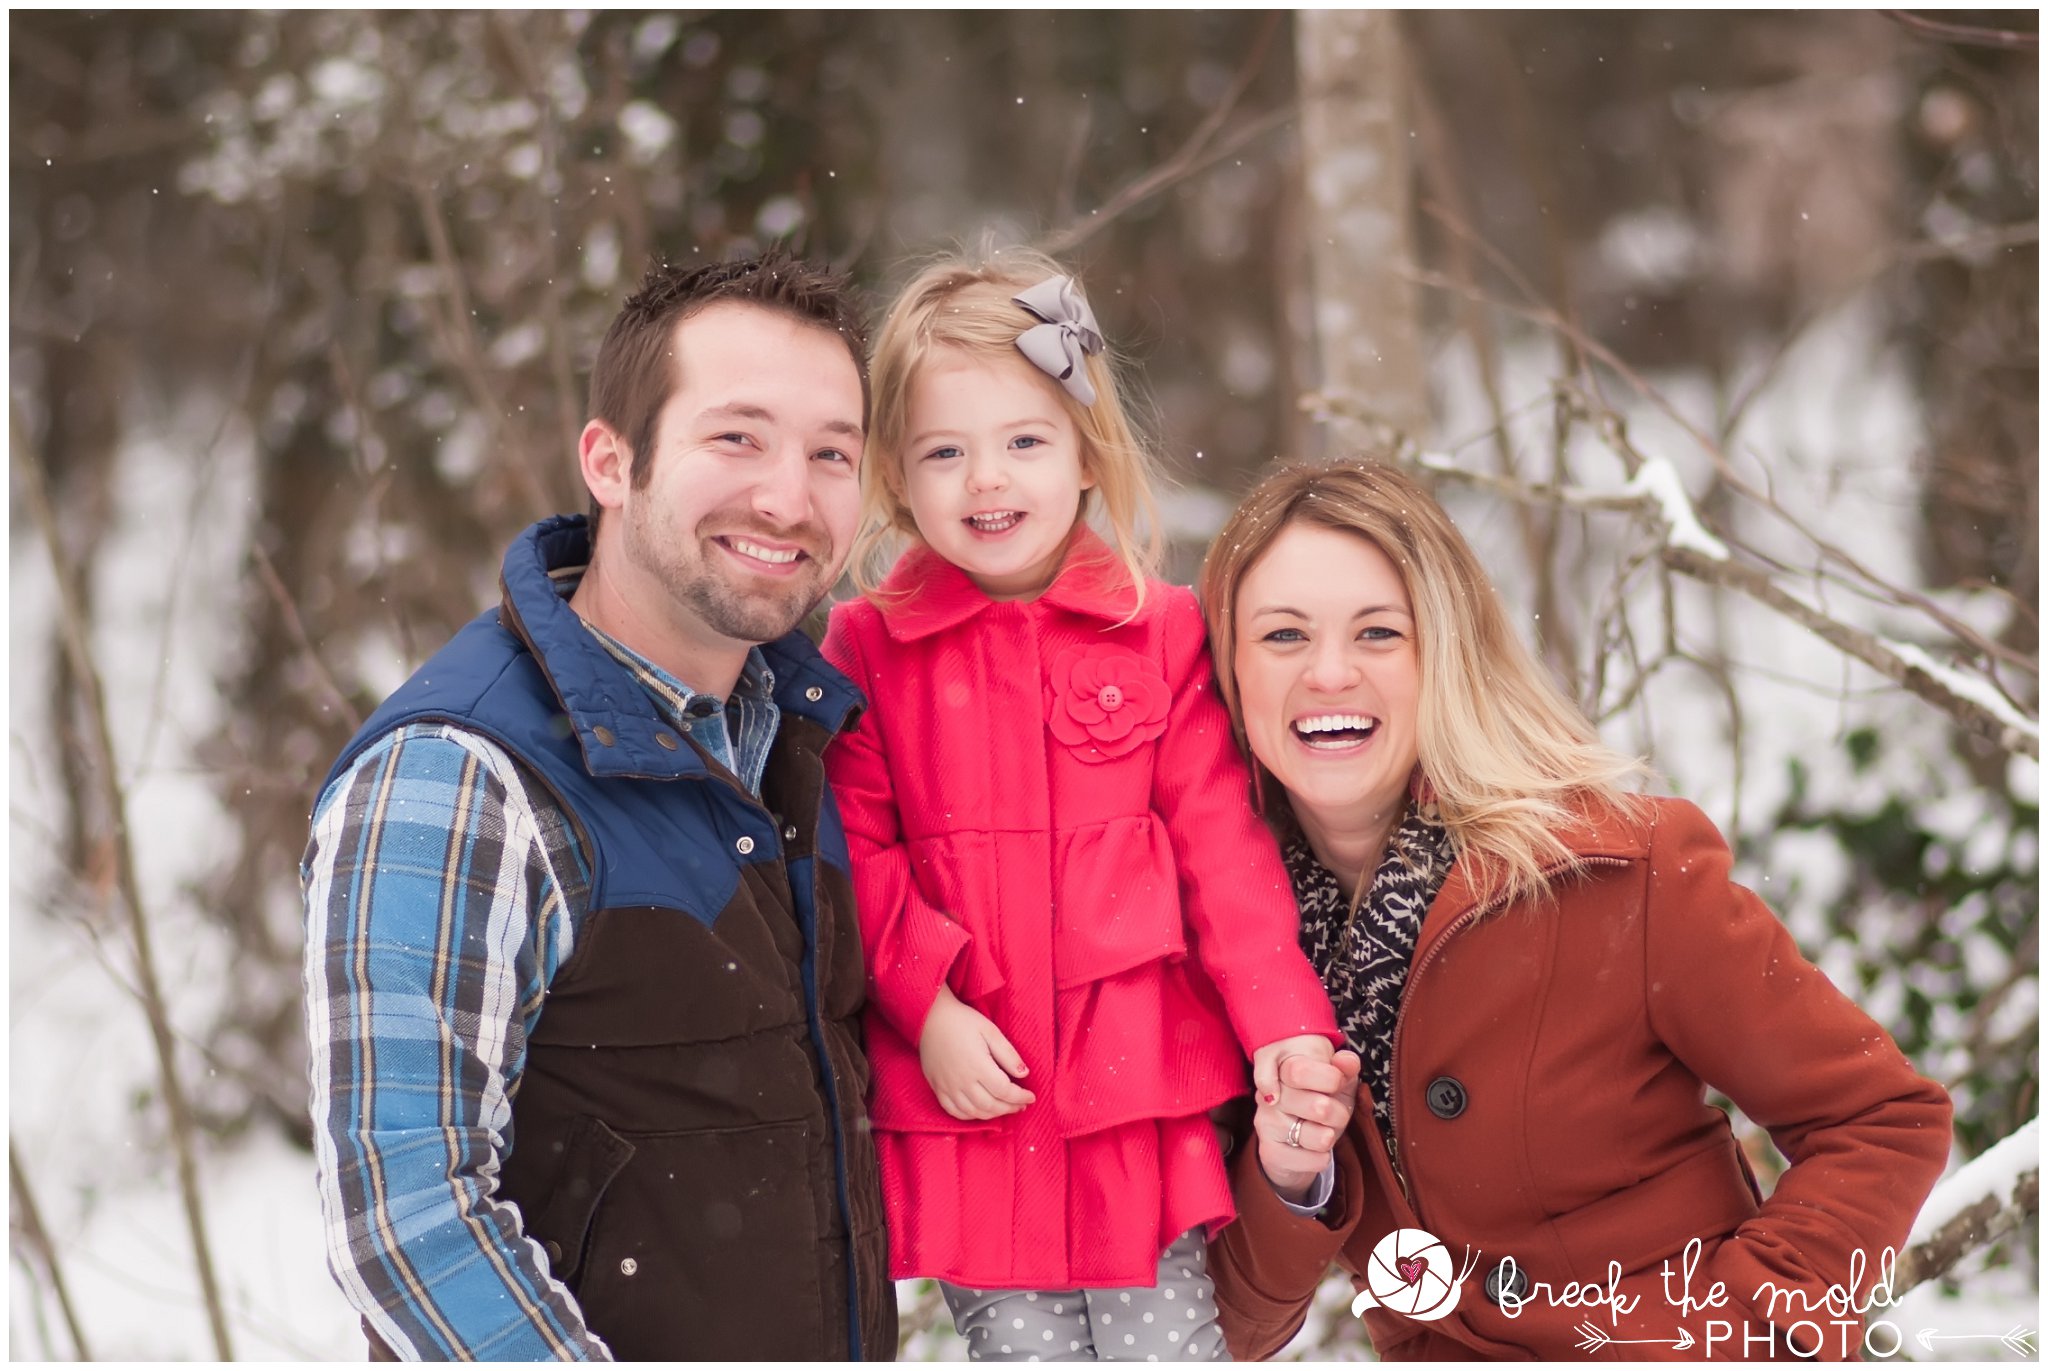 break-the-mold-photo-snowy-day-engagement-photos-knoxville-tn-tennessee-snow-day-pictures-winter-outdoor-unique-family_1509.jpg